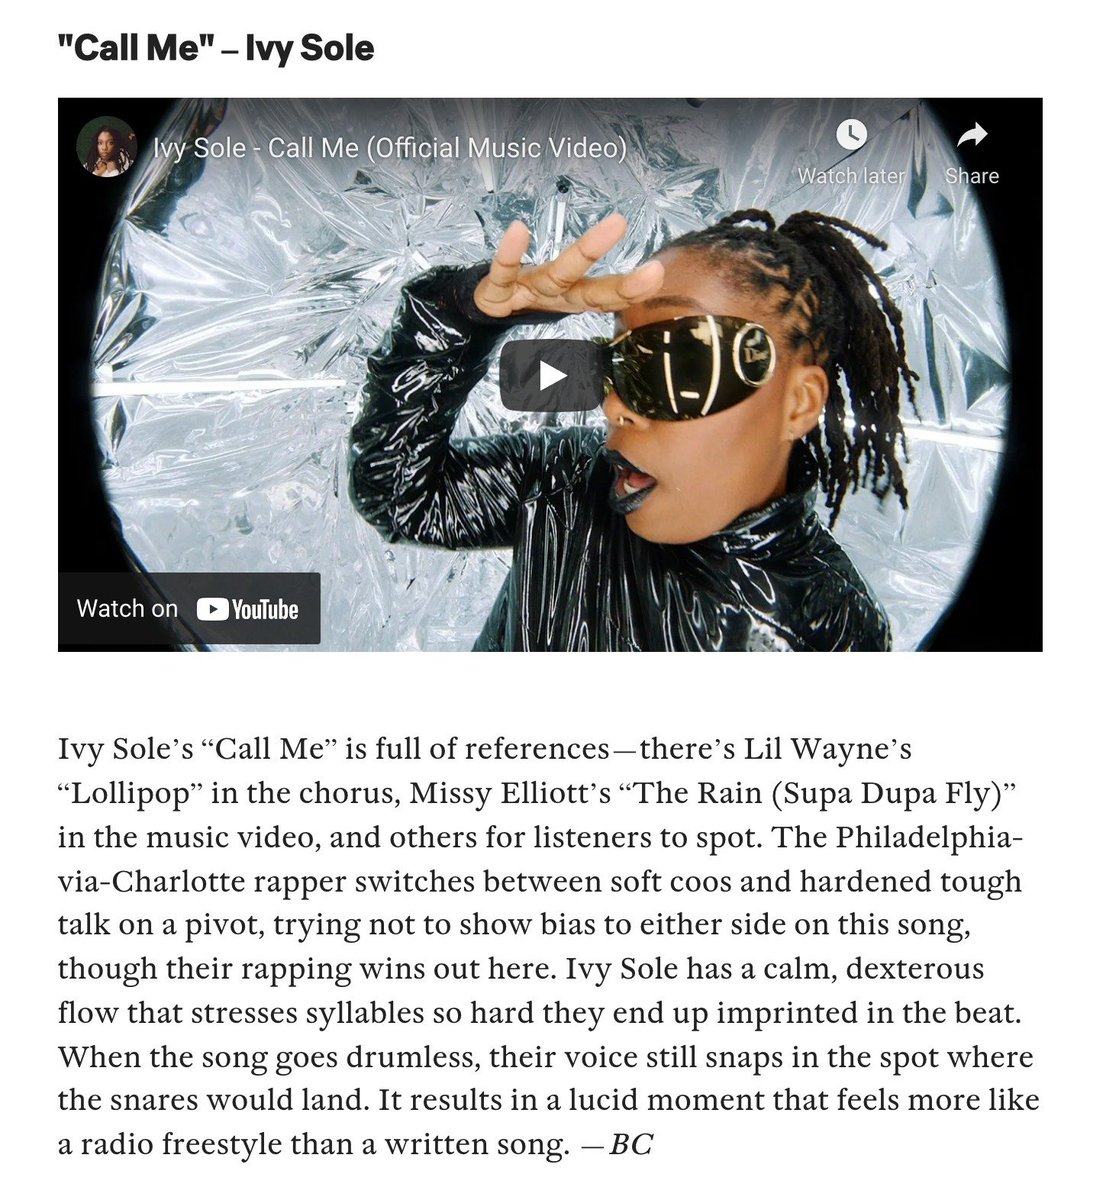 RT @IvySole: first time in @thefader, much gratitude to @callenderdates + @boldcreationsHQ 
https://t.co/wUXu05IbTL https://t.co/VmnTaAddUC